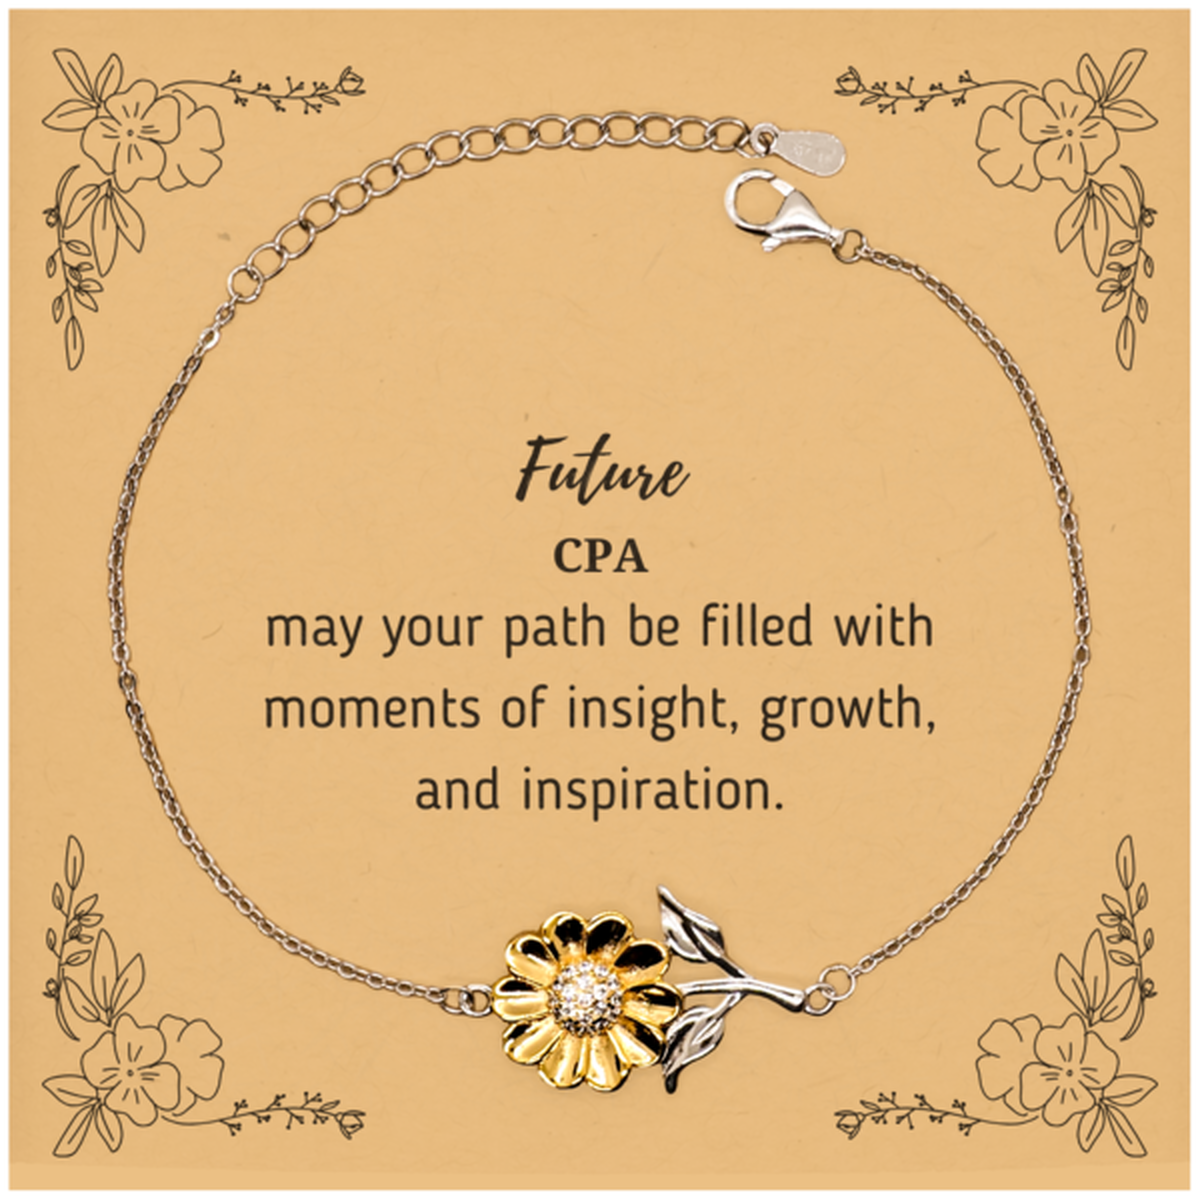 Future CPA Gifts, May your path be filled with moments of insight, Graduation Gifts for New CPA, Christmas Unique Sunflower Bracelet For Men, Women, Friends